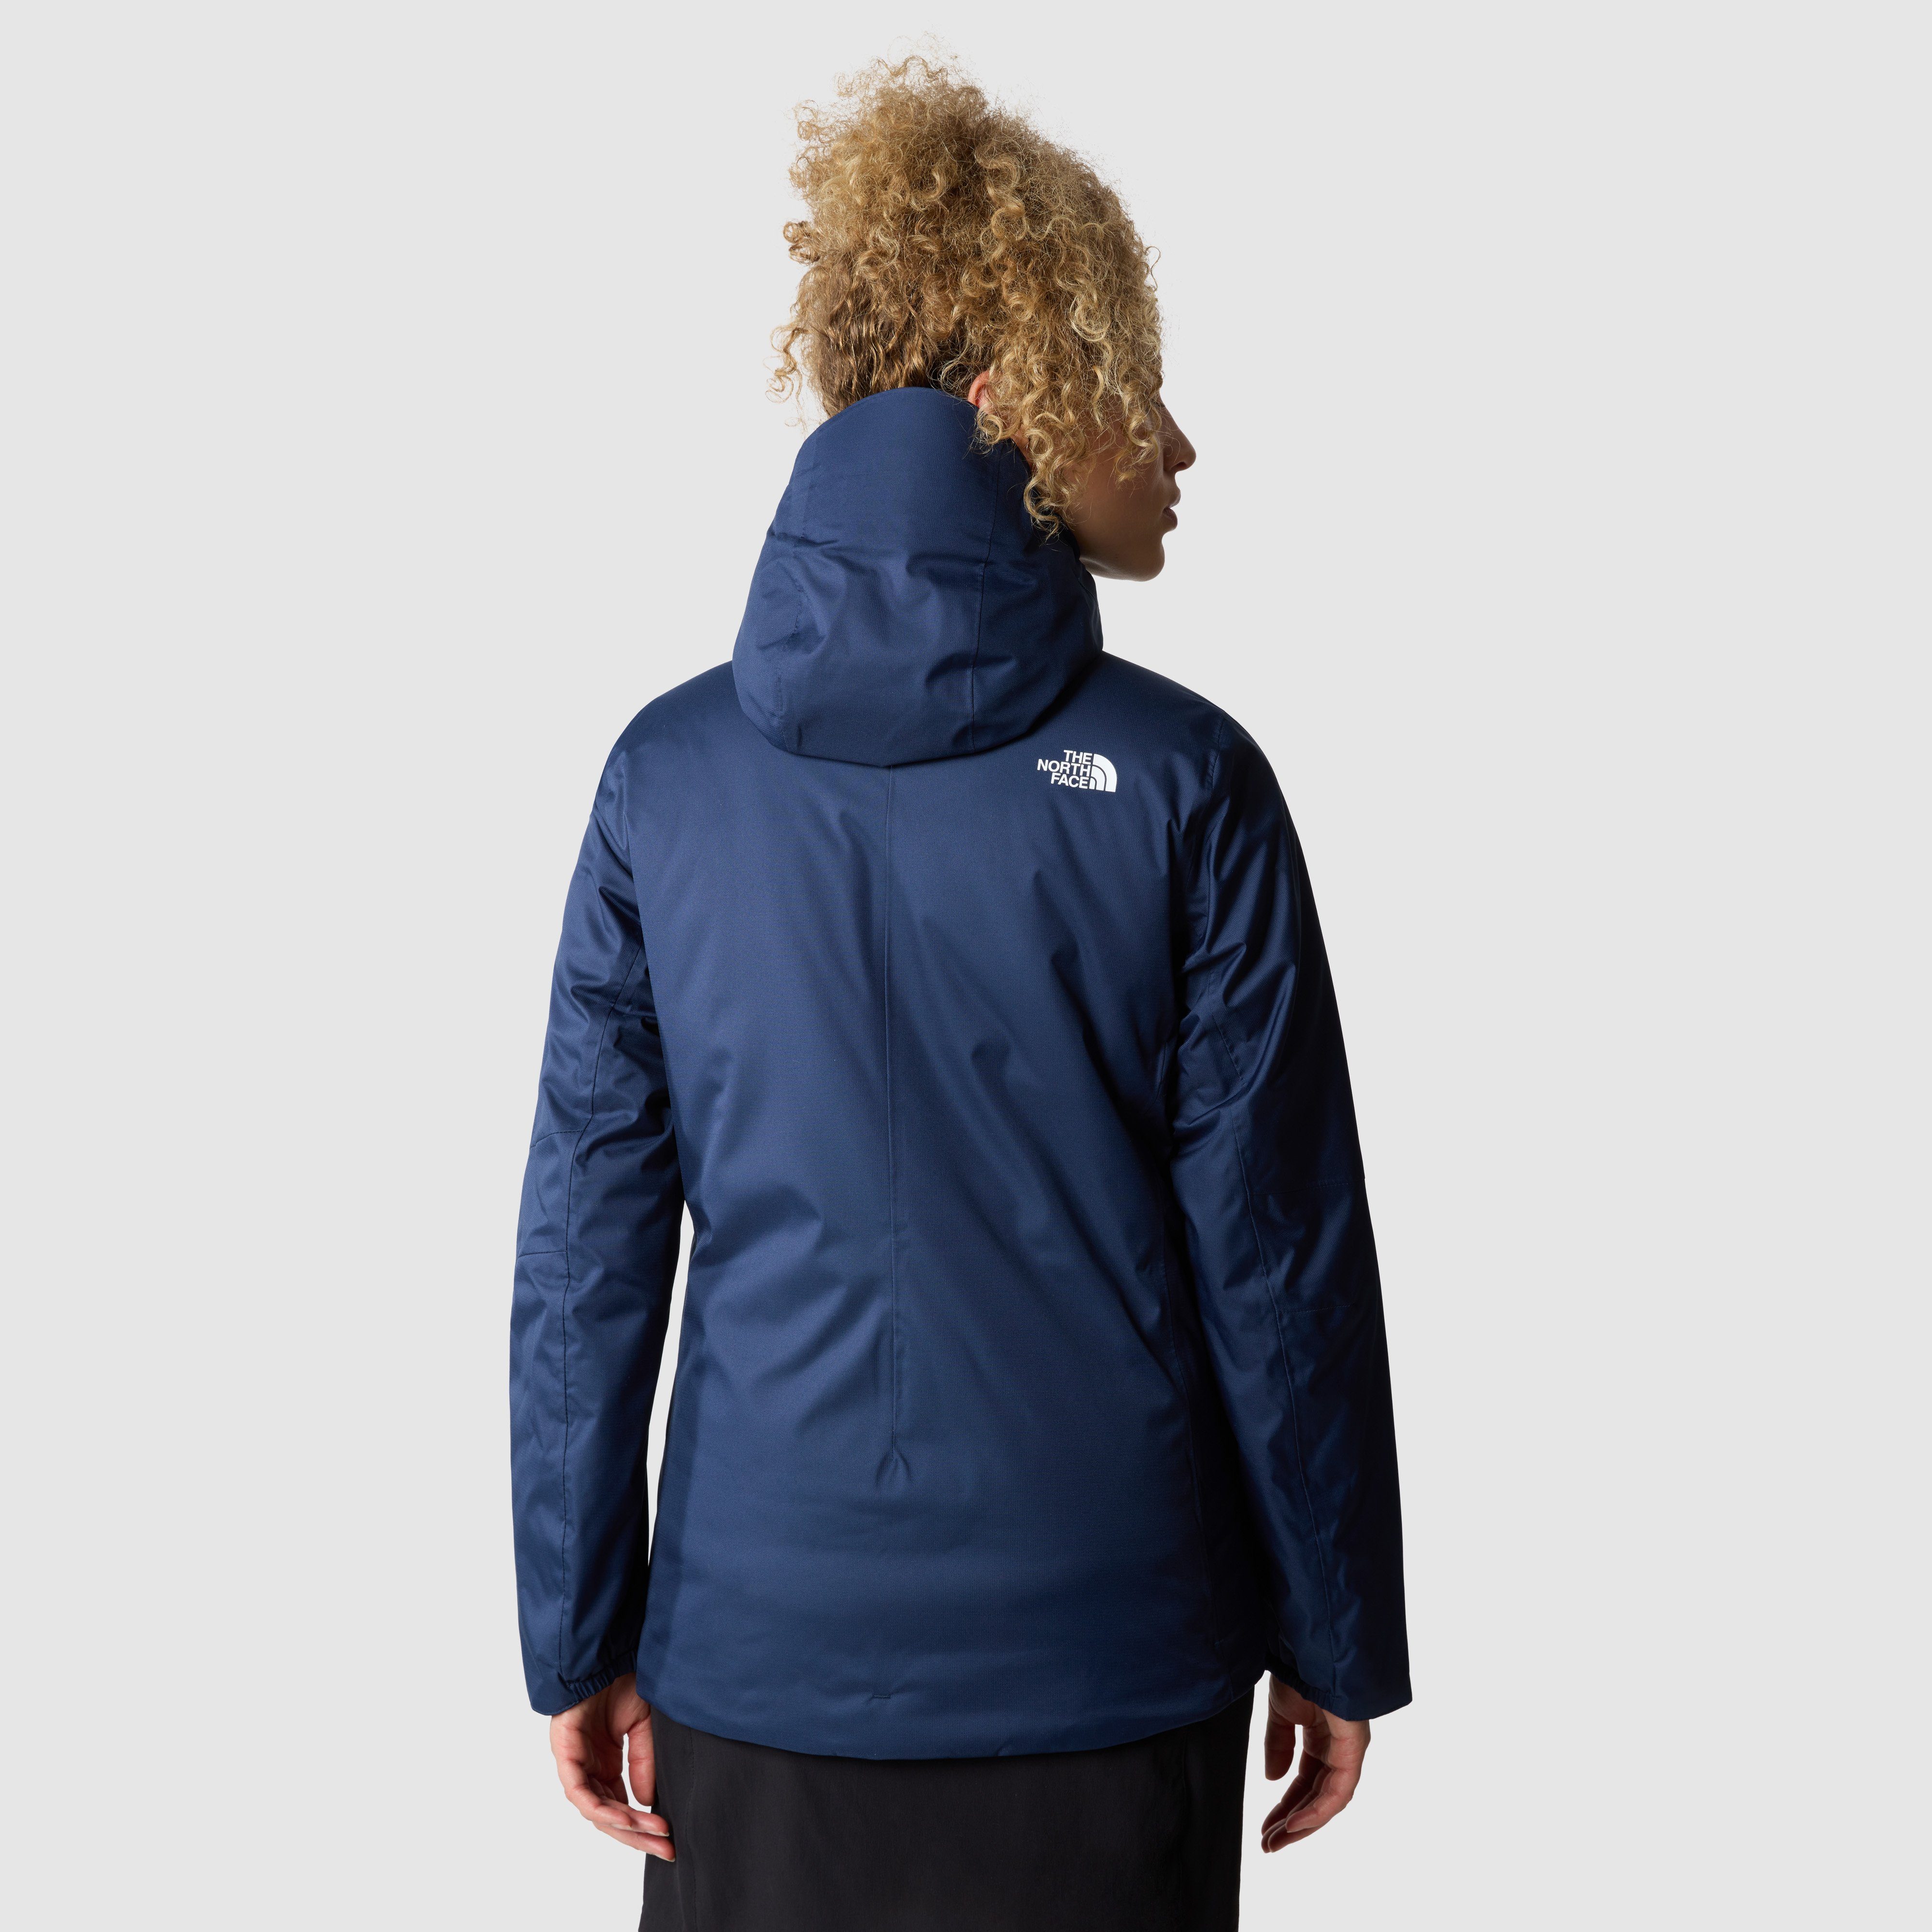 QUEST INSULATED North Logodruck Face JACKET mit W The Funktionsjacke